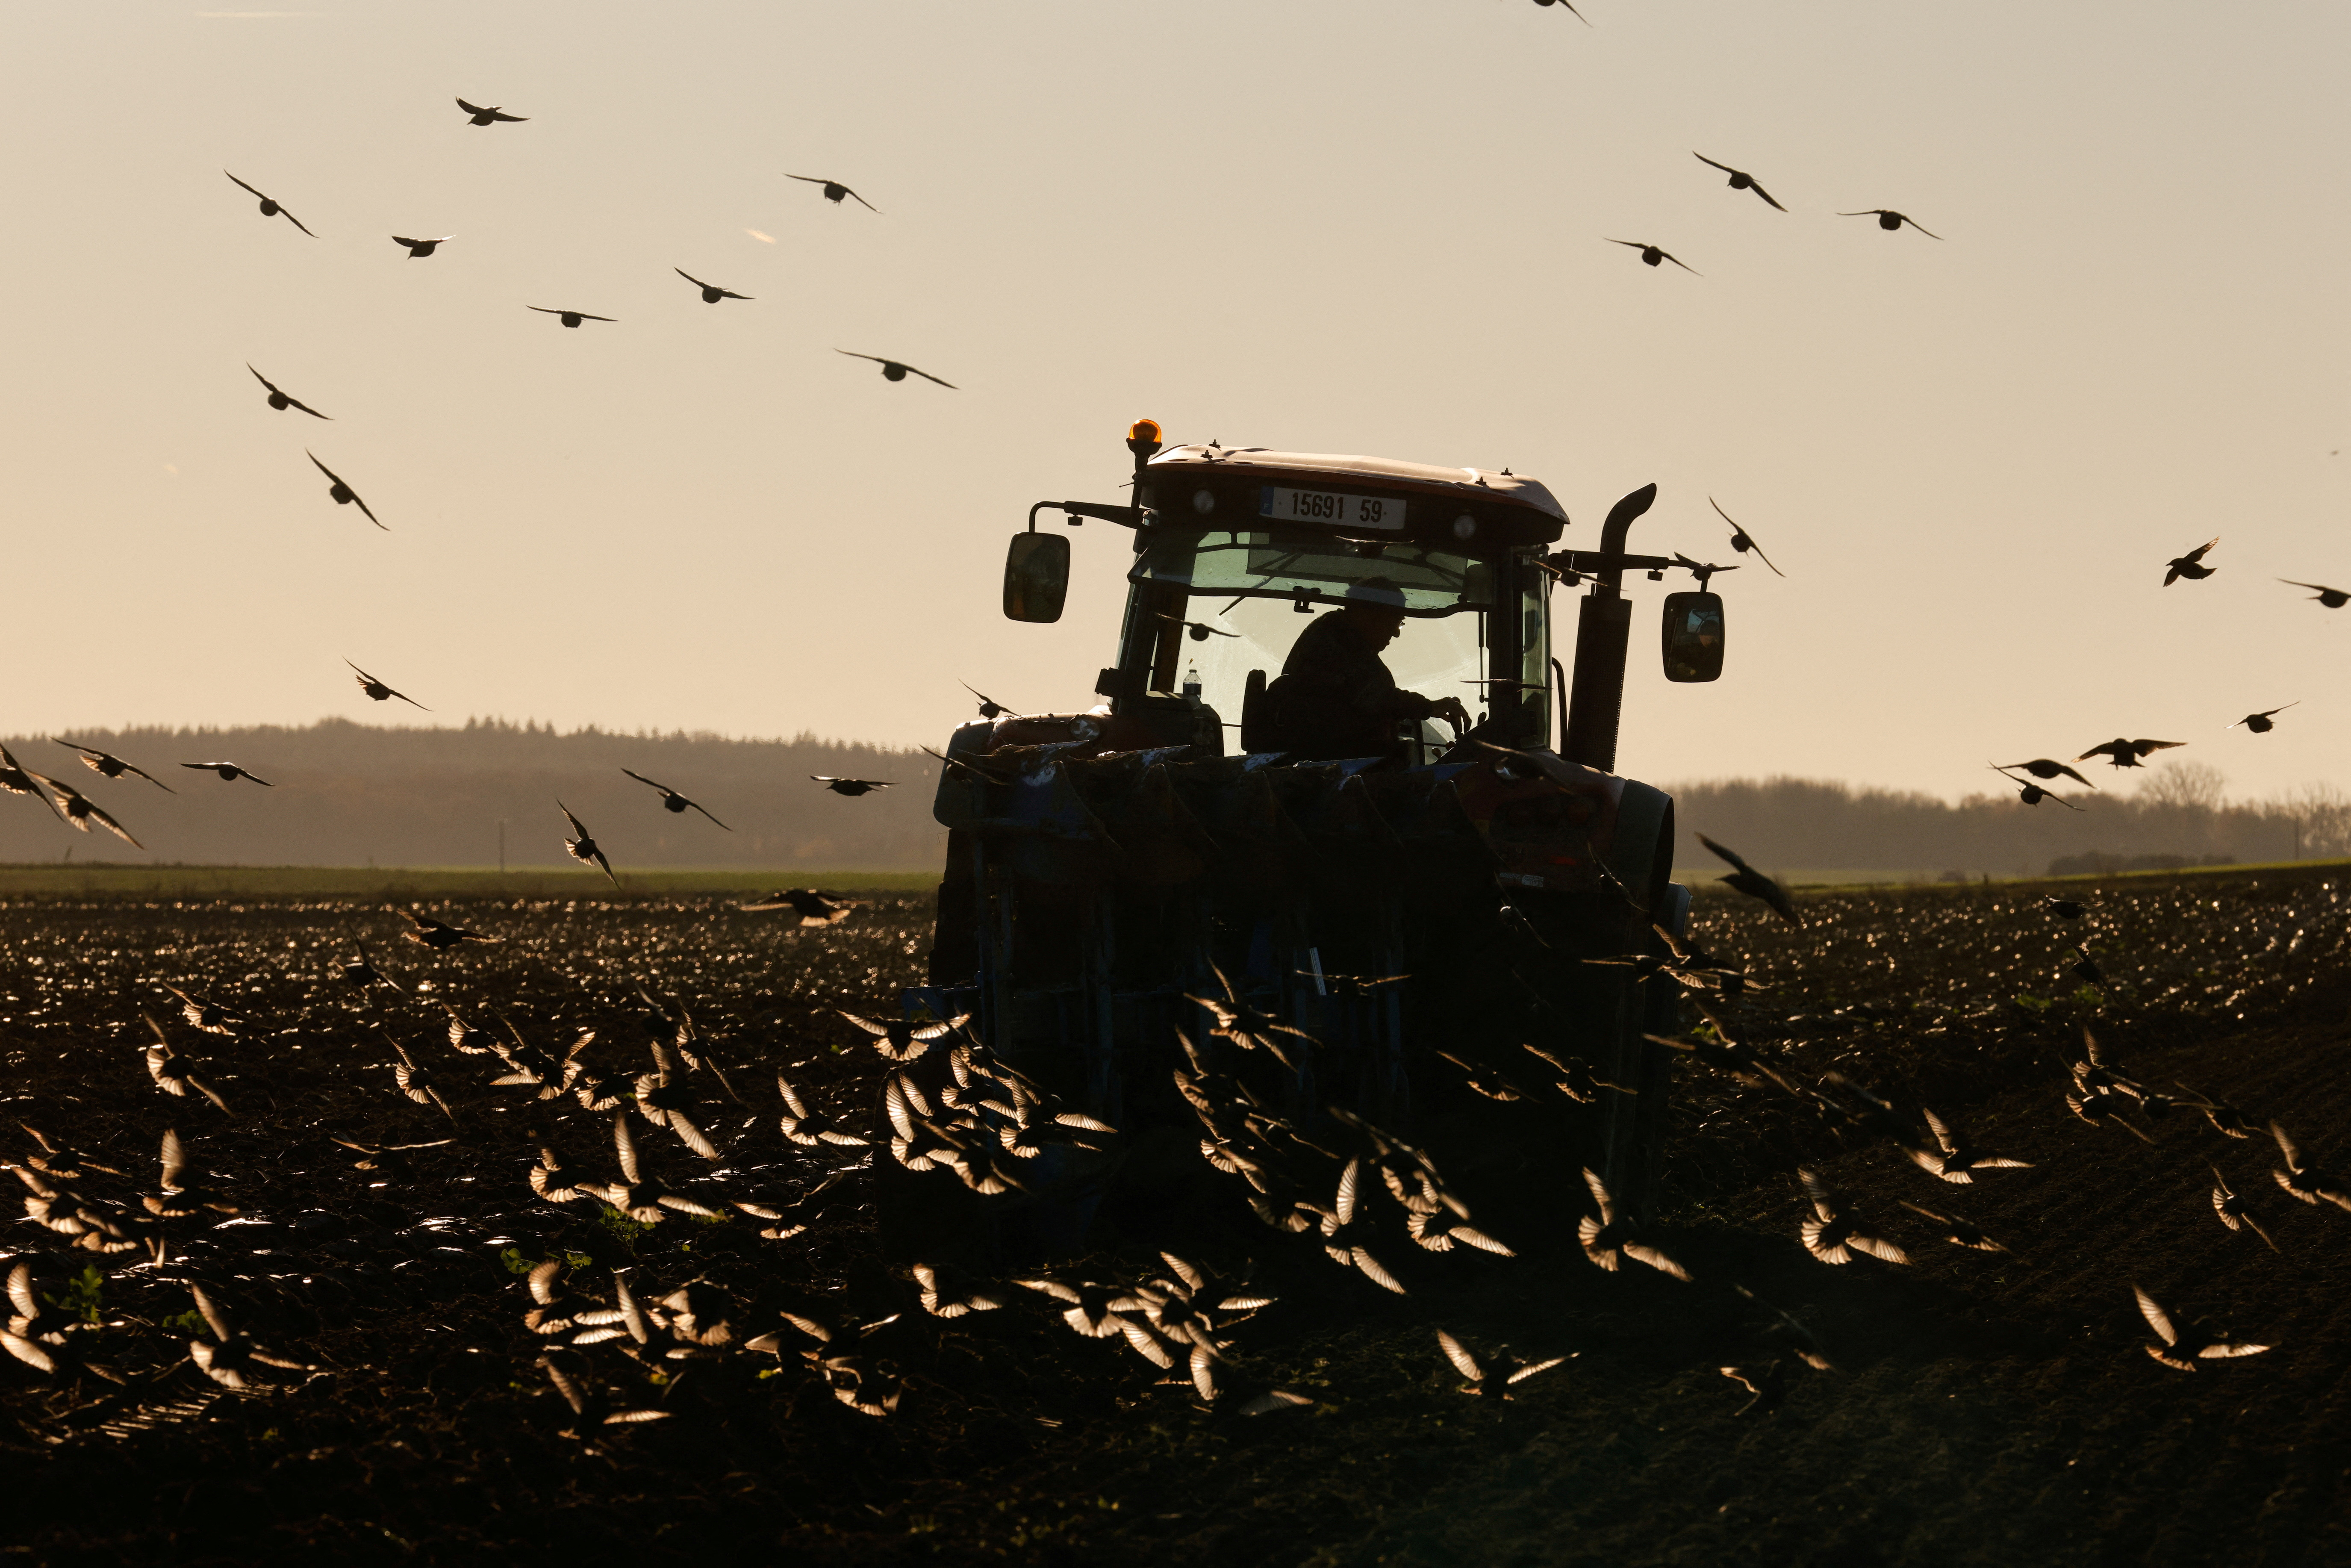 Starlings fly over a tractor as french farmer plows his field in Haynecourt